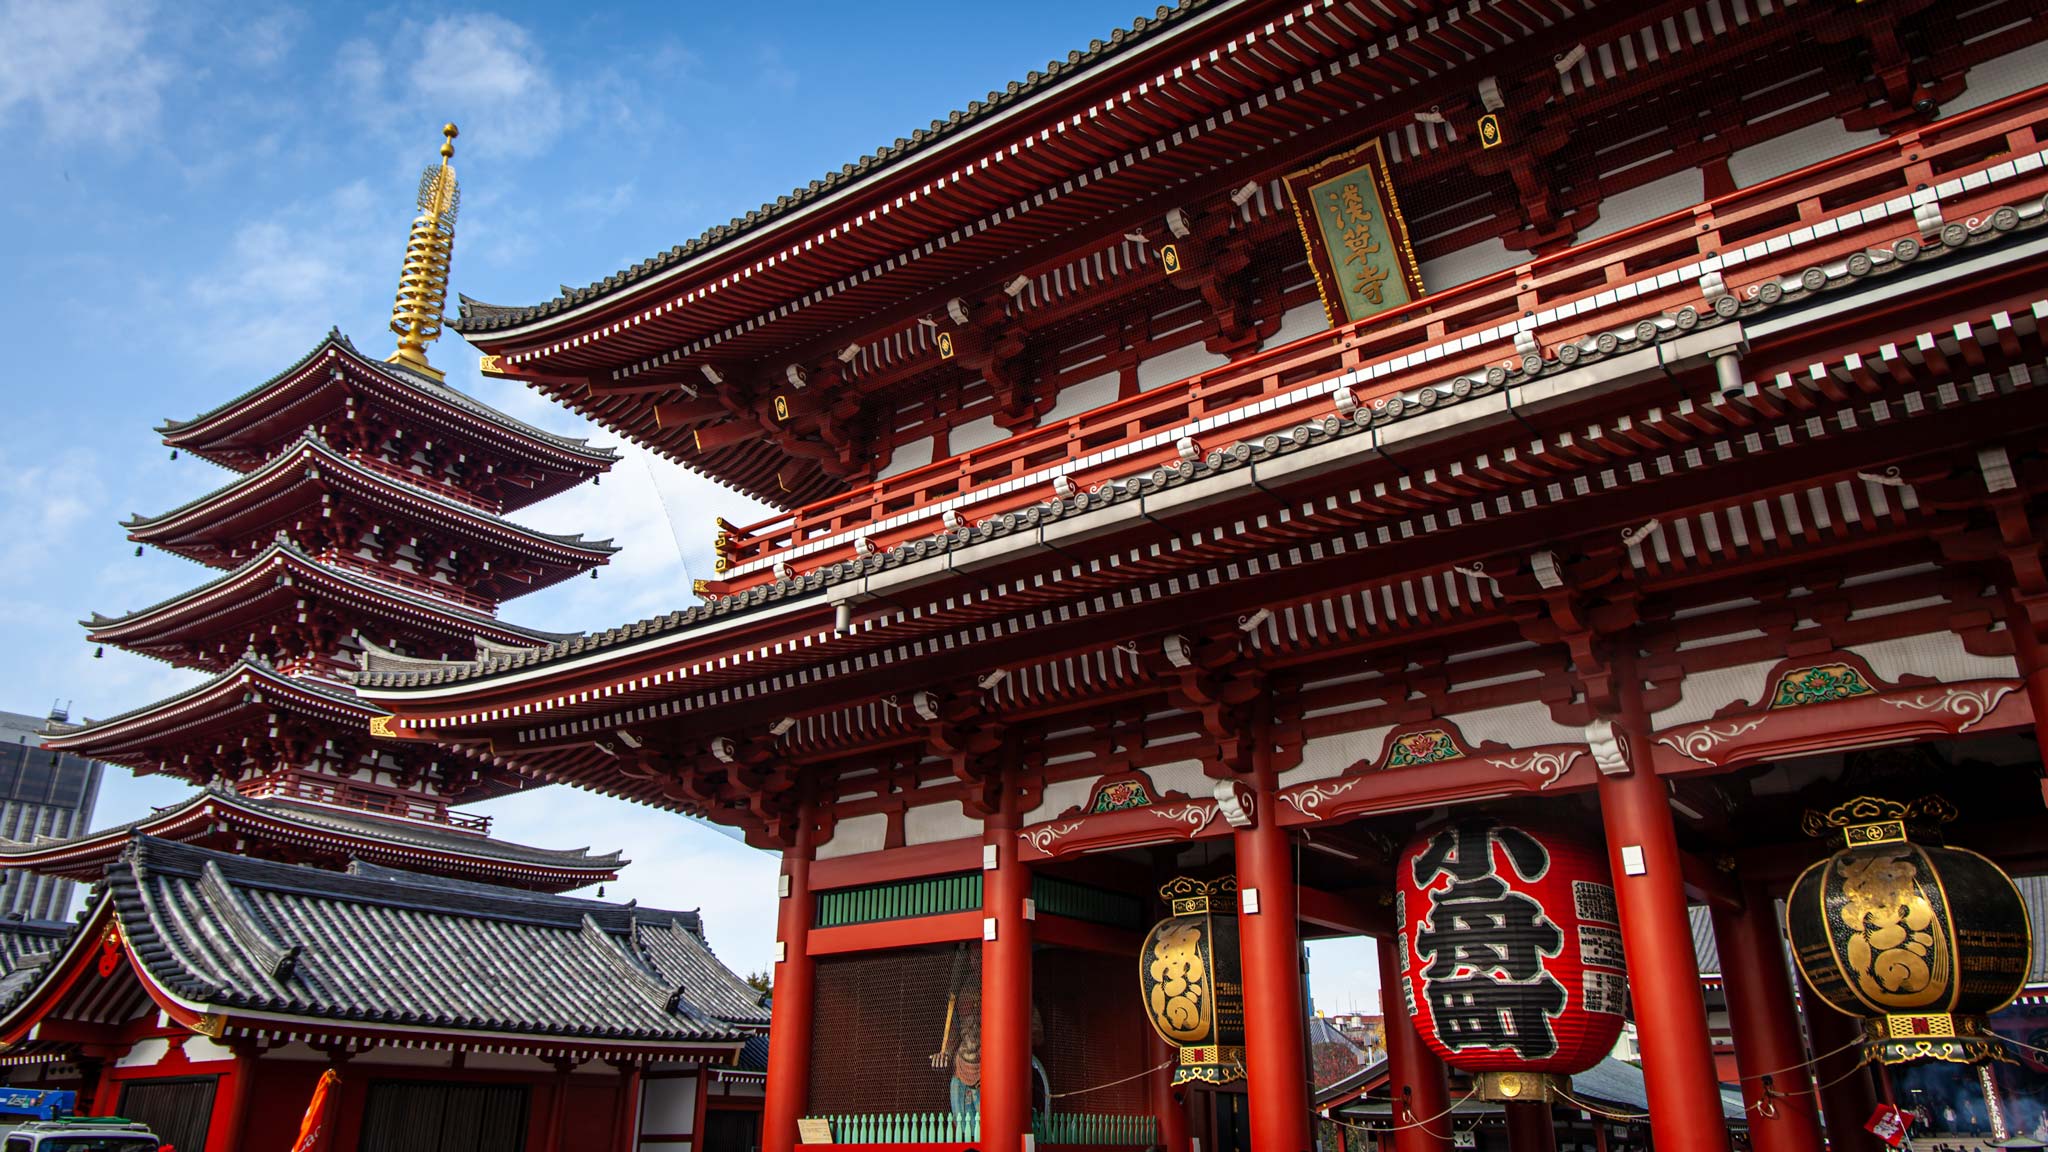 A beautiful red pagoda sits next to a large red temple in the city of Tokyo